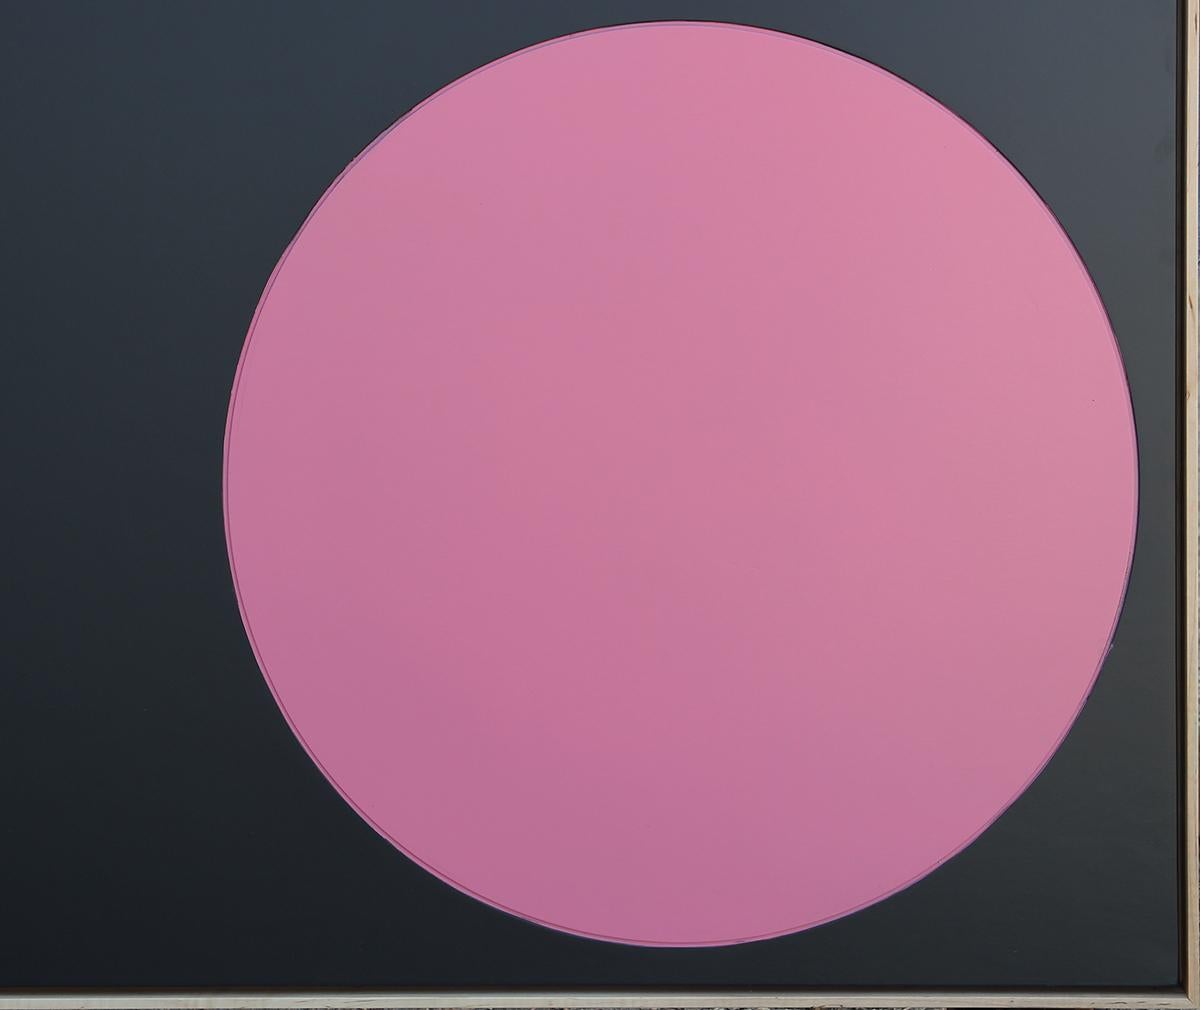 Abstract geometric sculptural painting by Houston, TX artist, Matthew Reeves. This work depicts a green rectangle, blue triangle, and pink circle against a plain black background. Framed in a natural wood floating frame.

Dimensions Without Frame: H